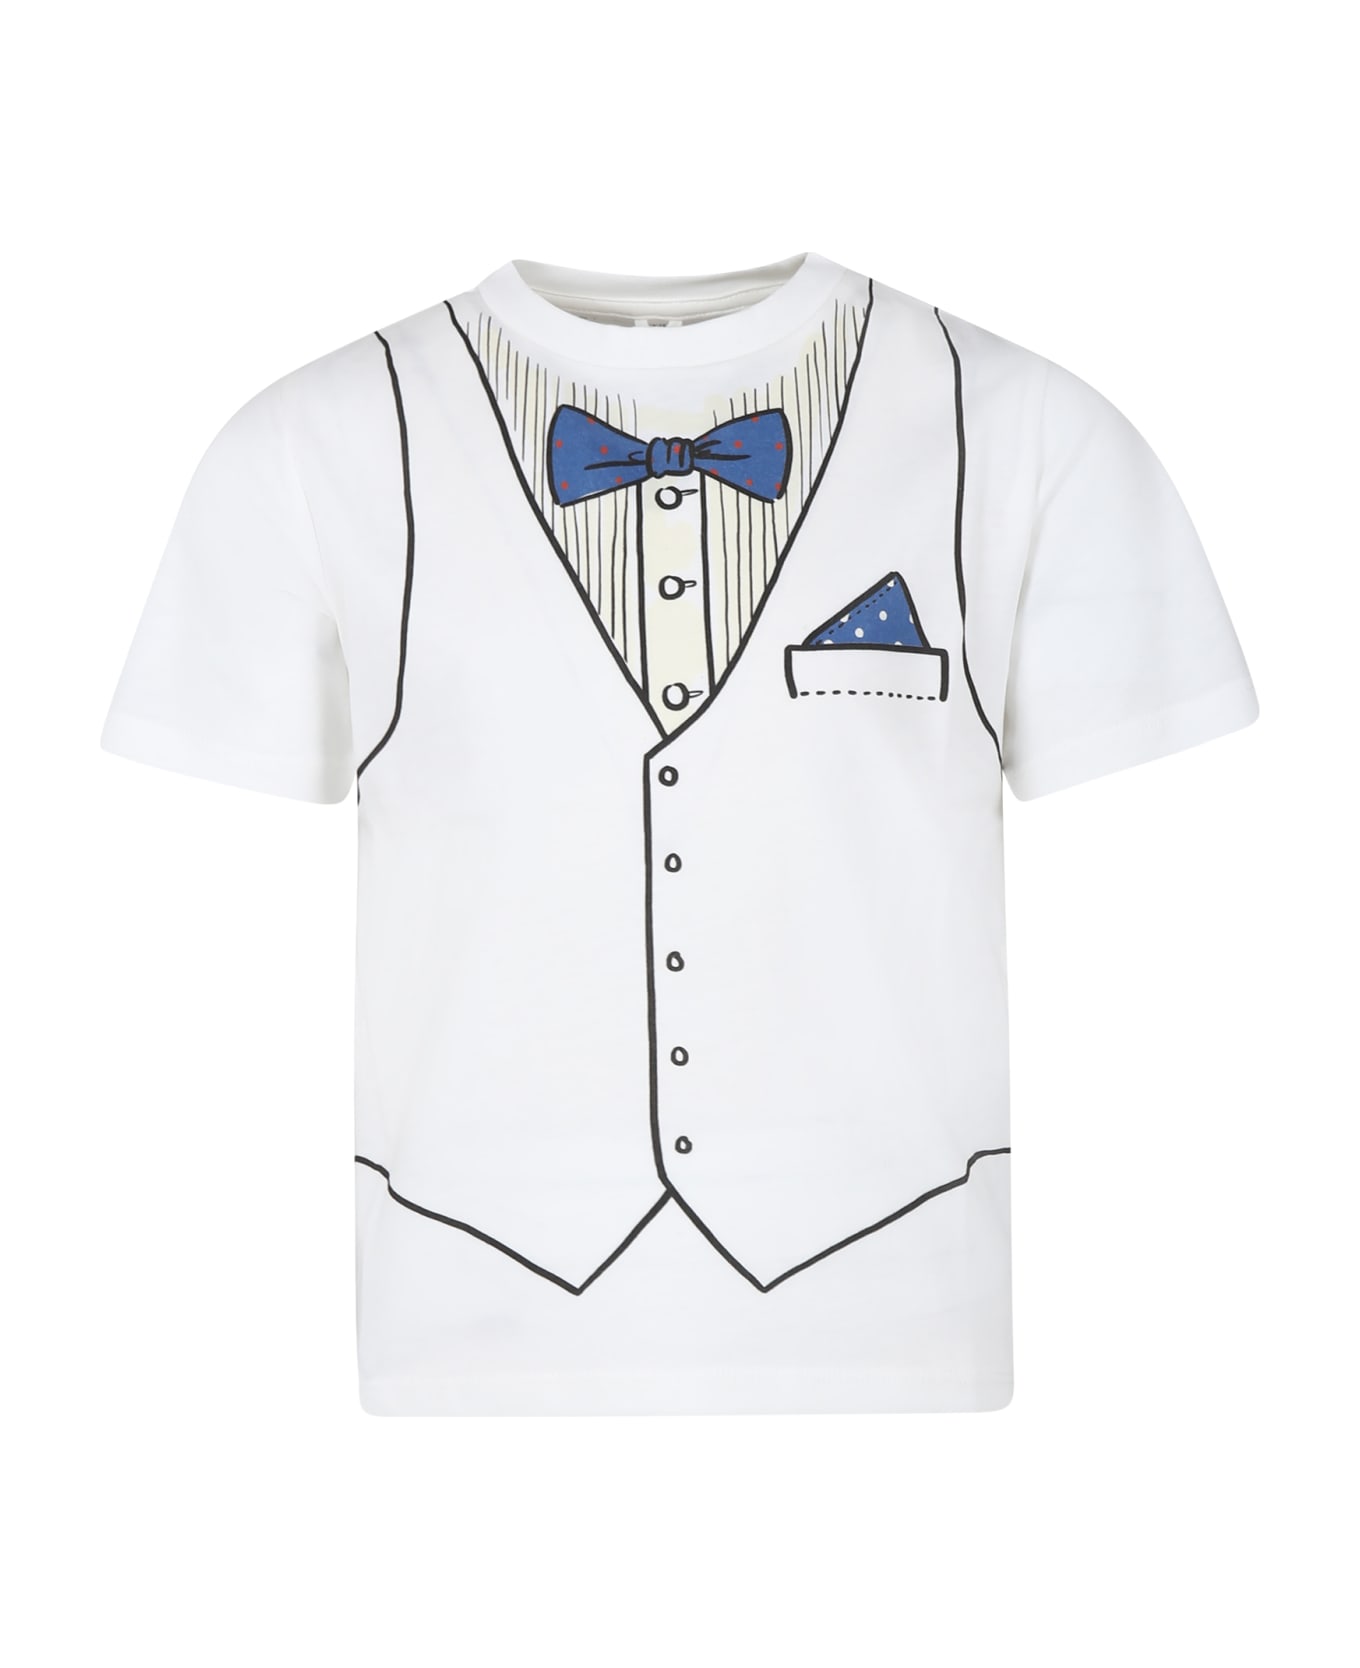 Stella McCartney Kids Ivory T-shirt For Boy With Bow Tie Print - Ivory